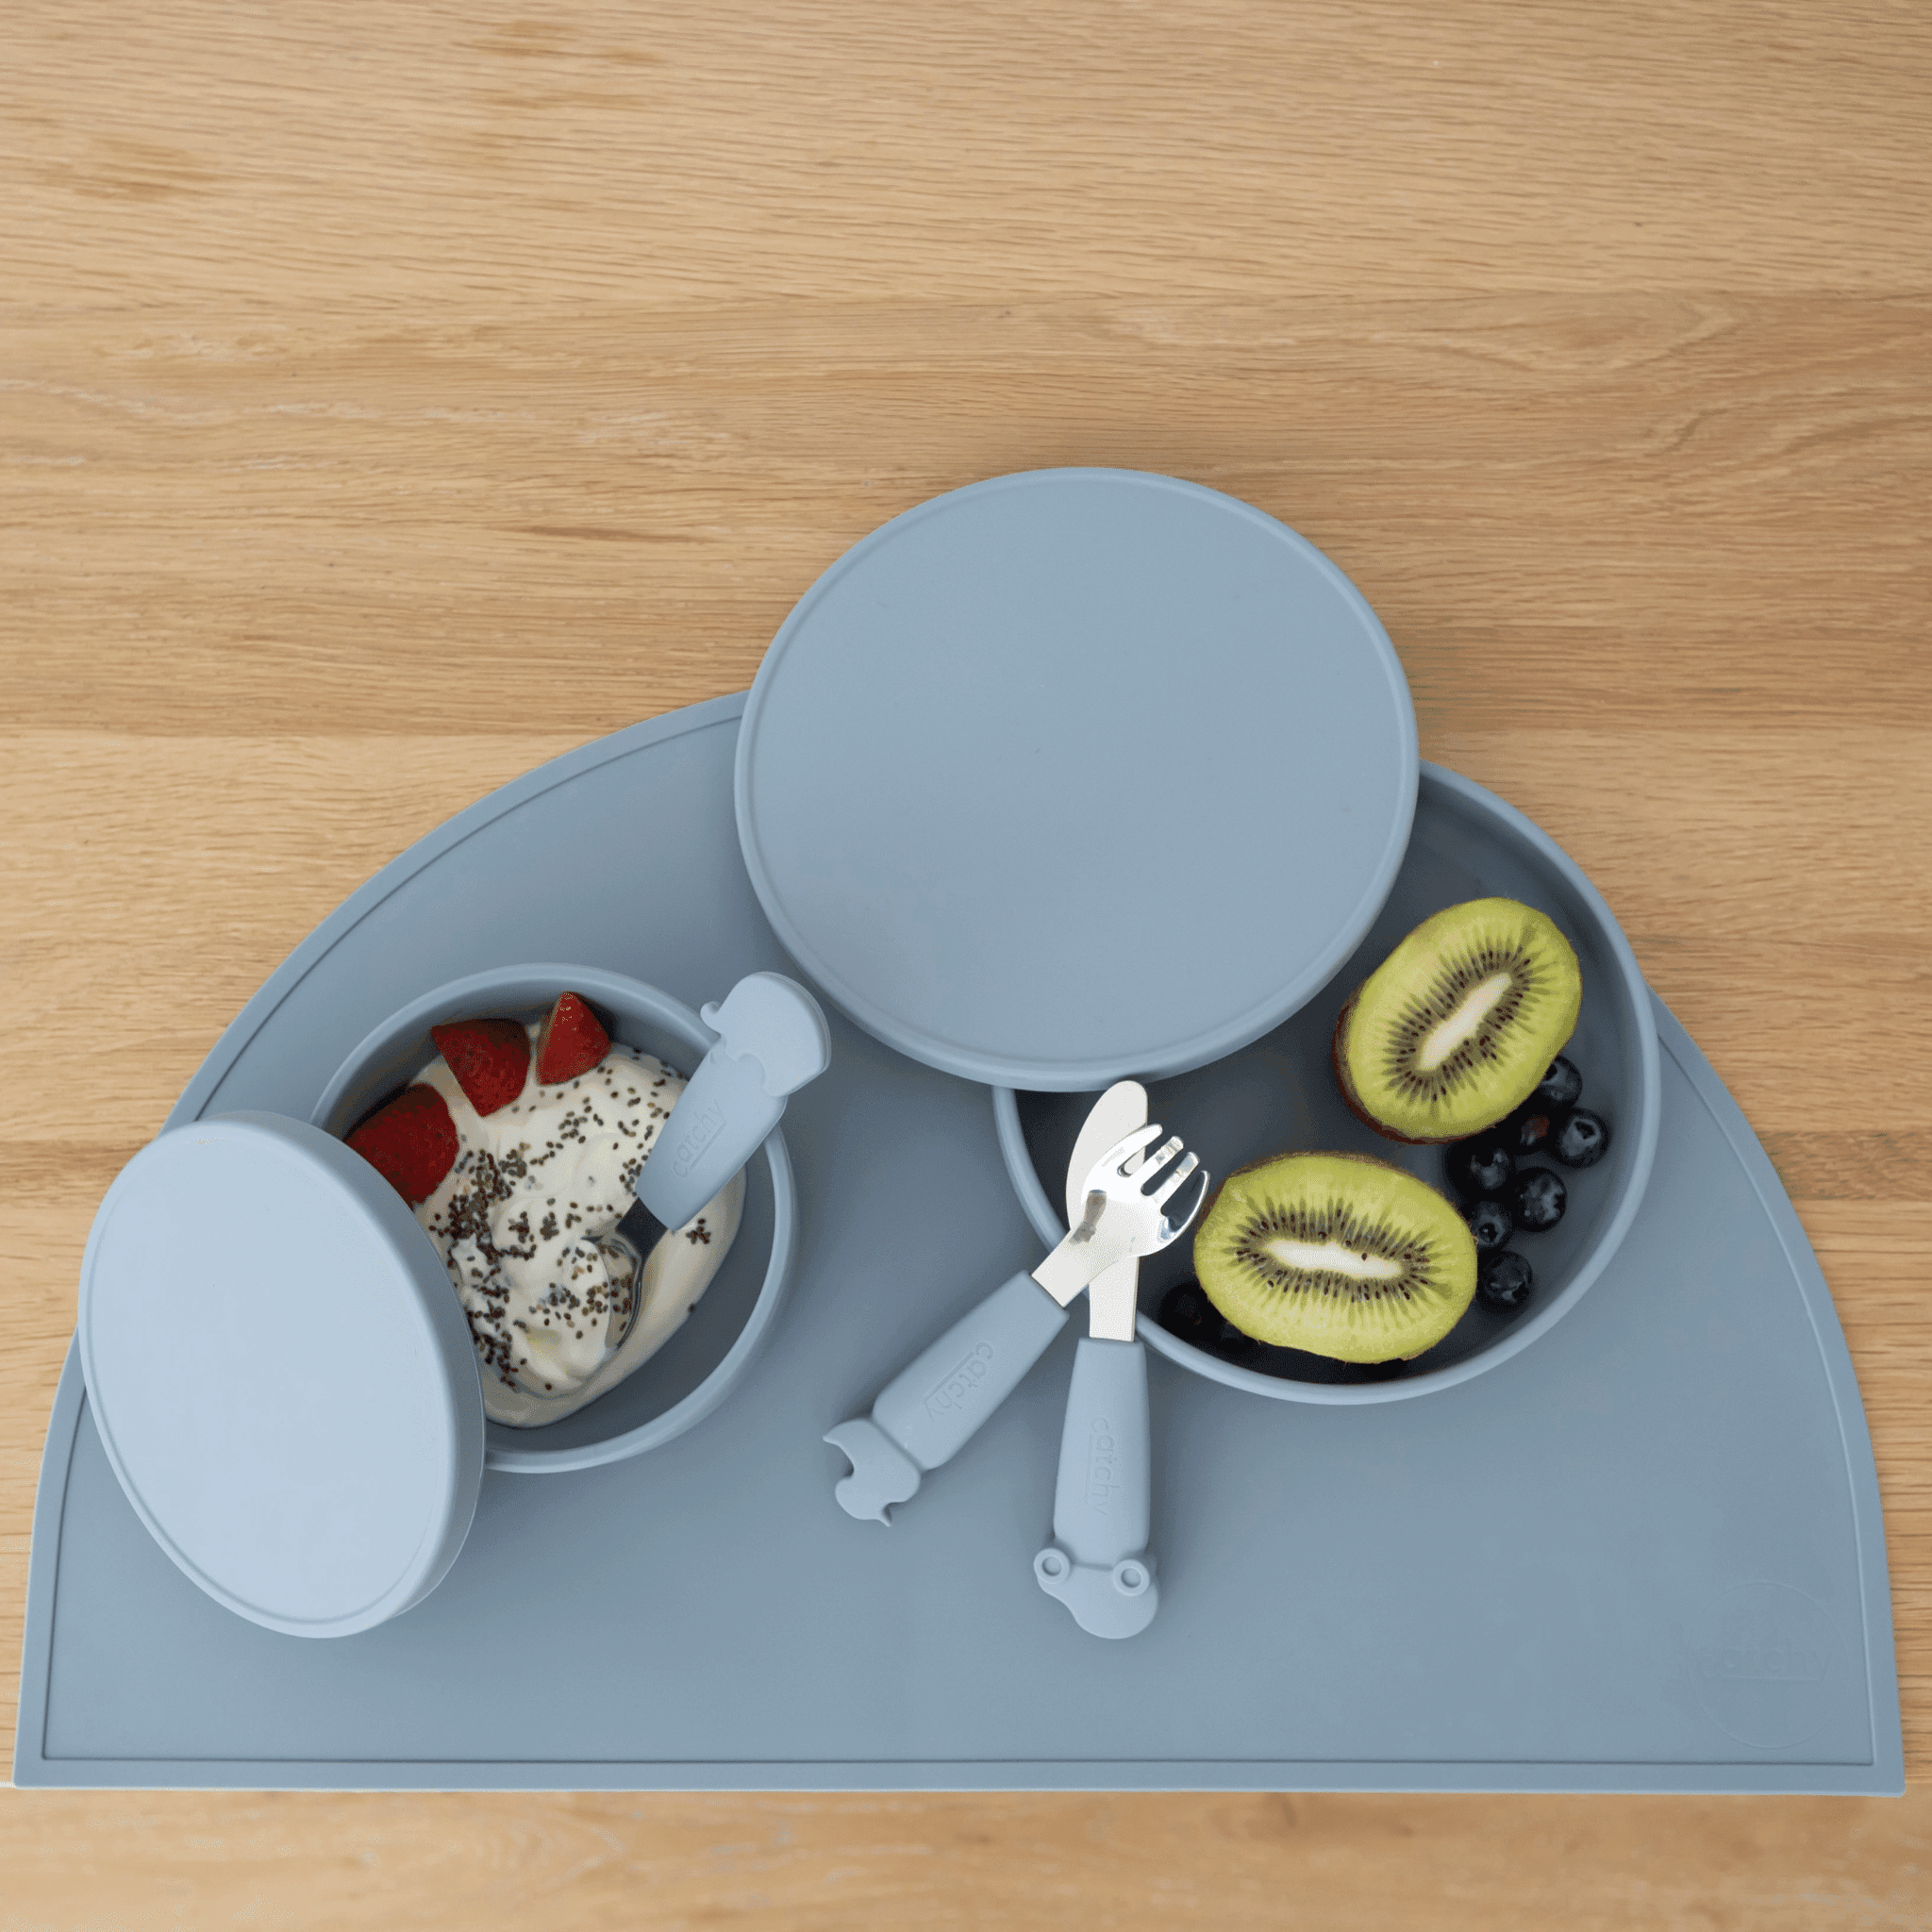 Silicone Plate & Lid Set - Catchy